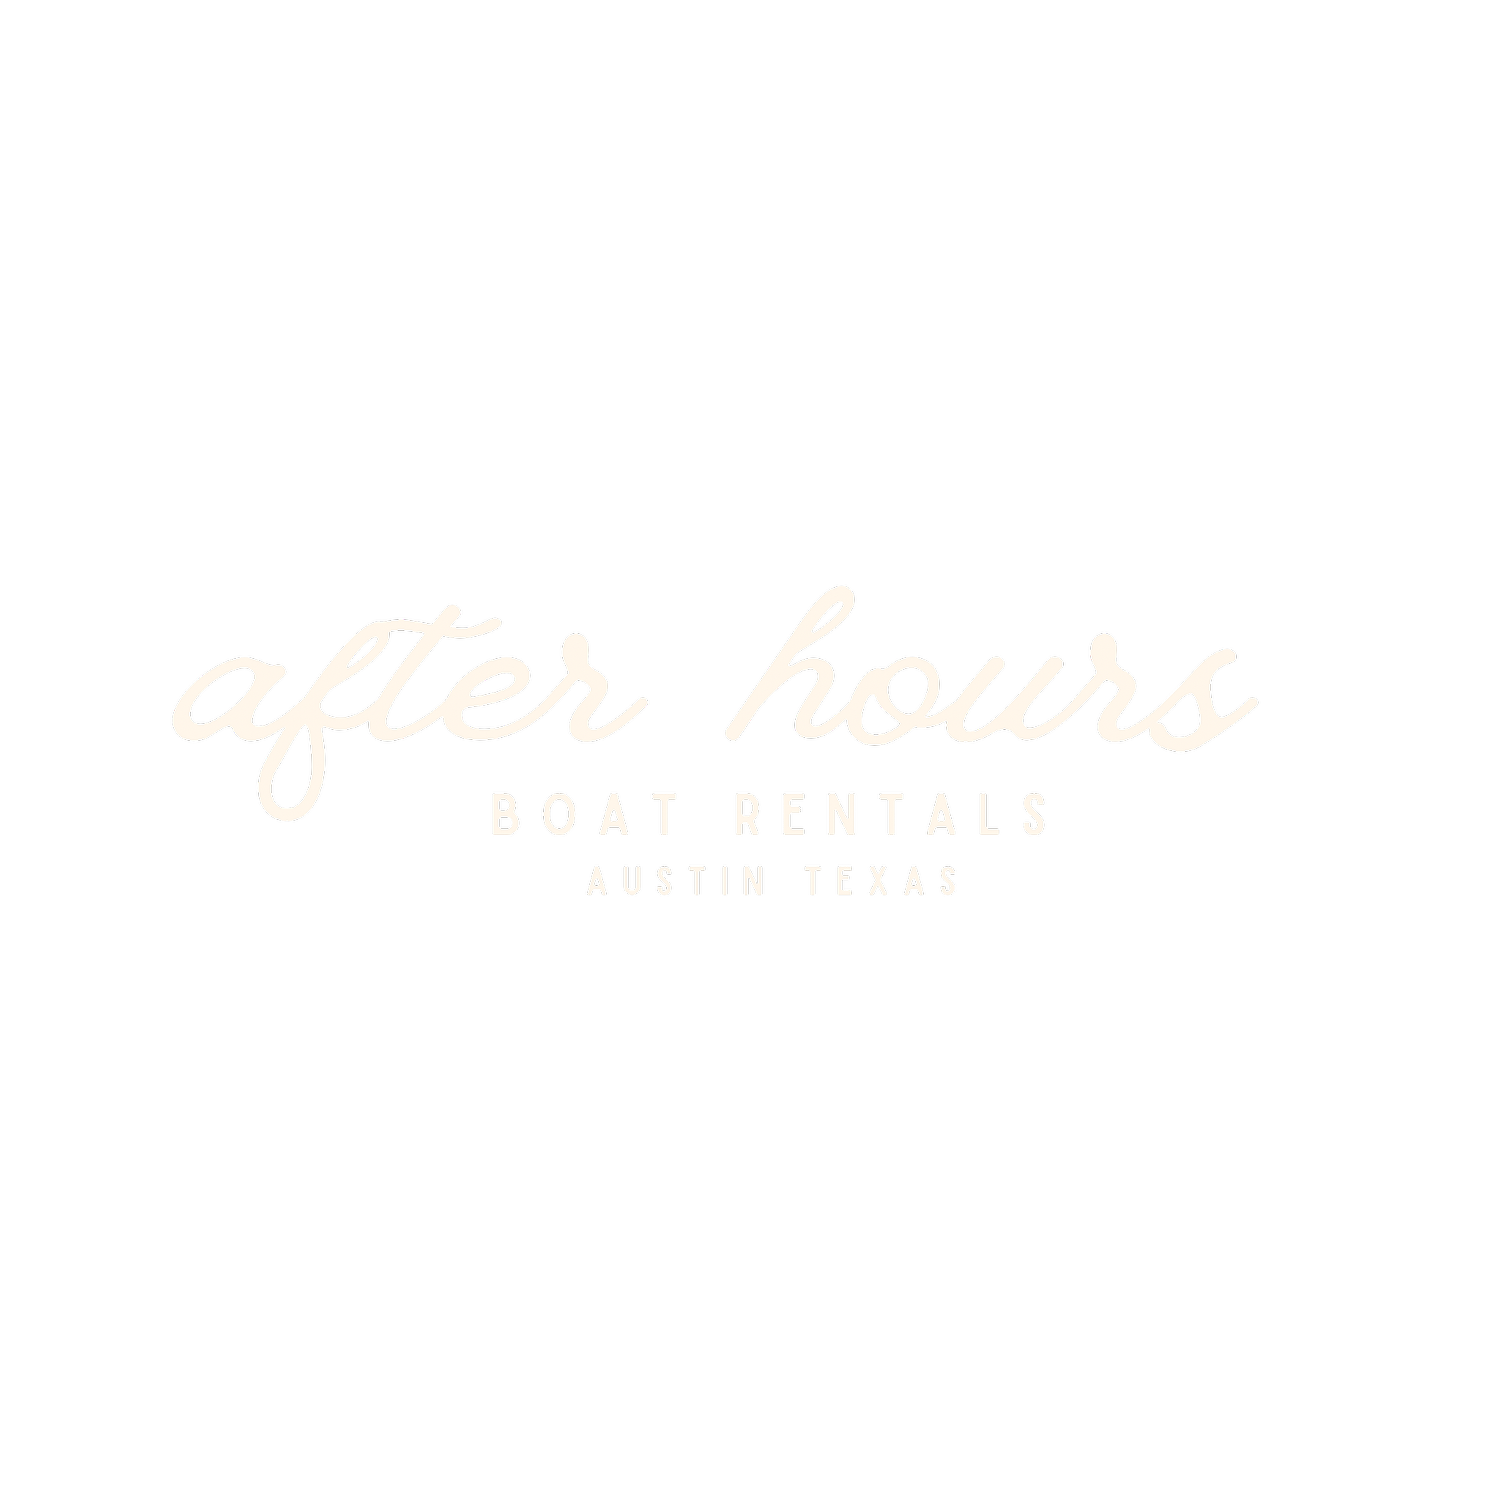 after hours surf boat rentals in austin texas!